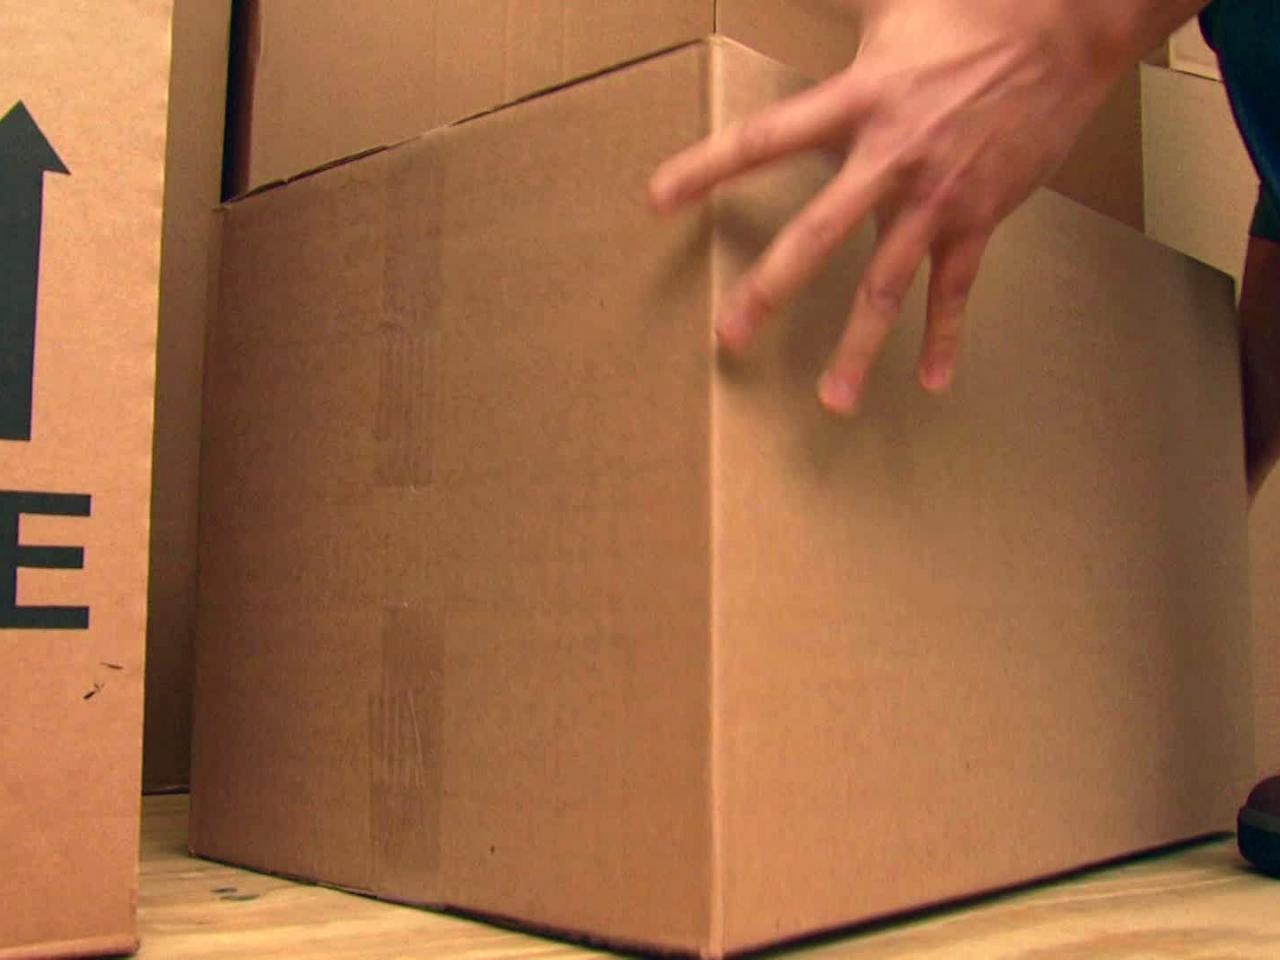 Why You Should Buy New Moving Boxes